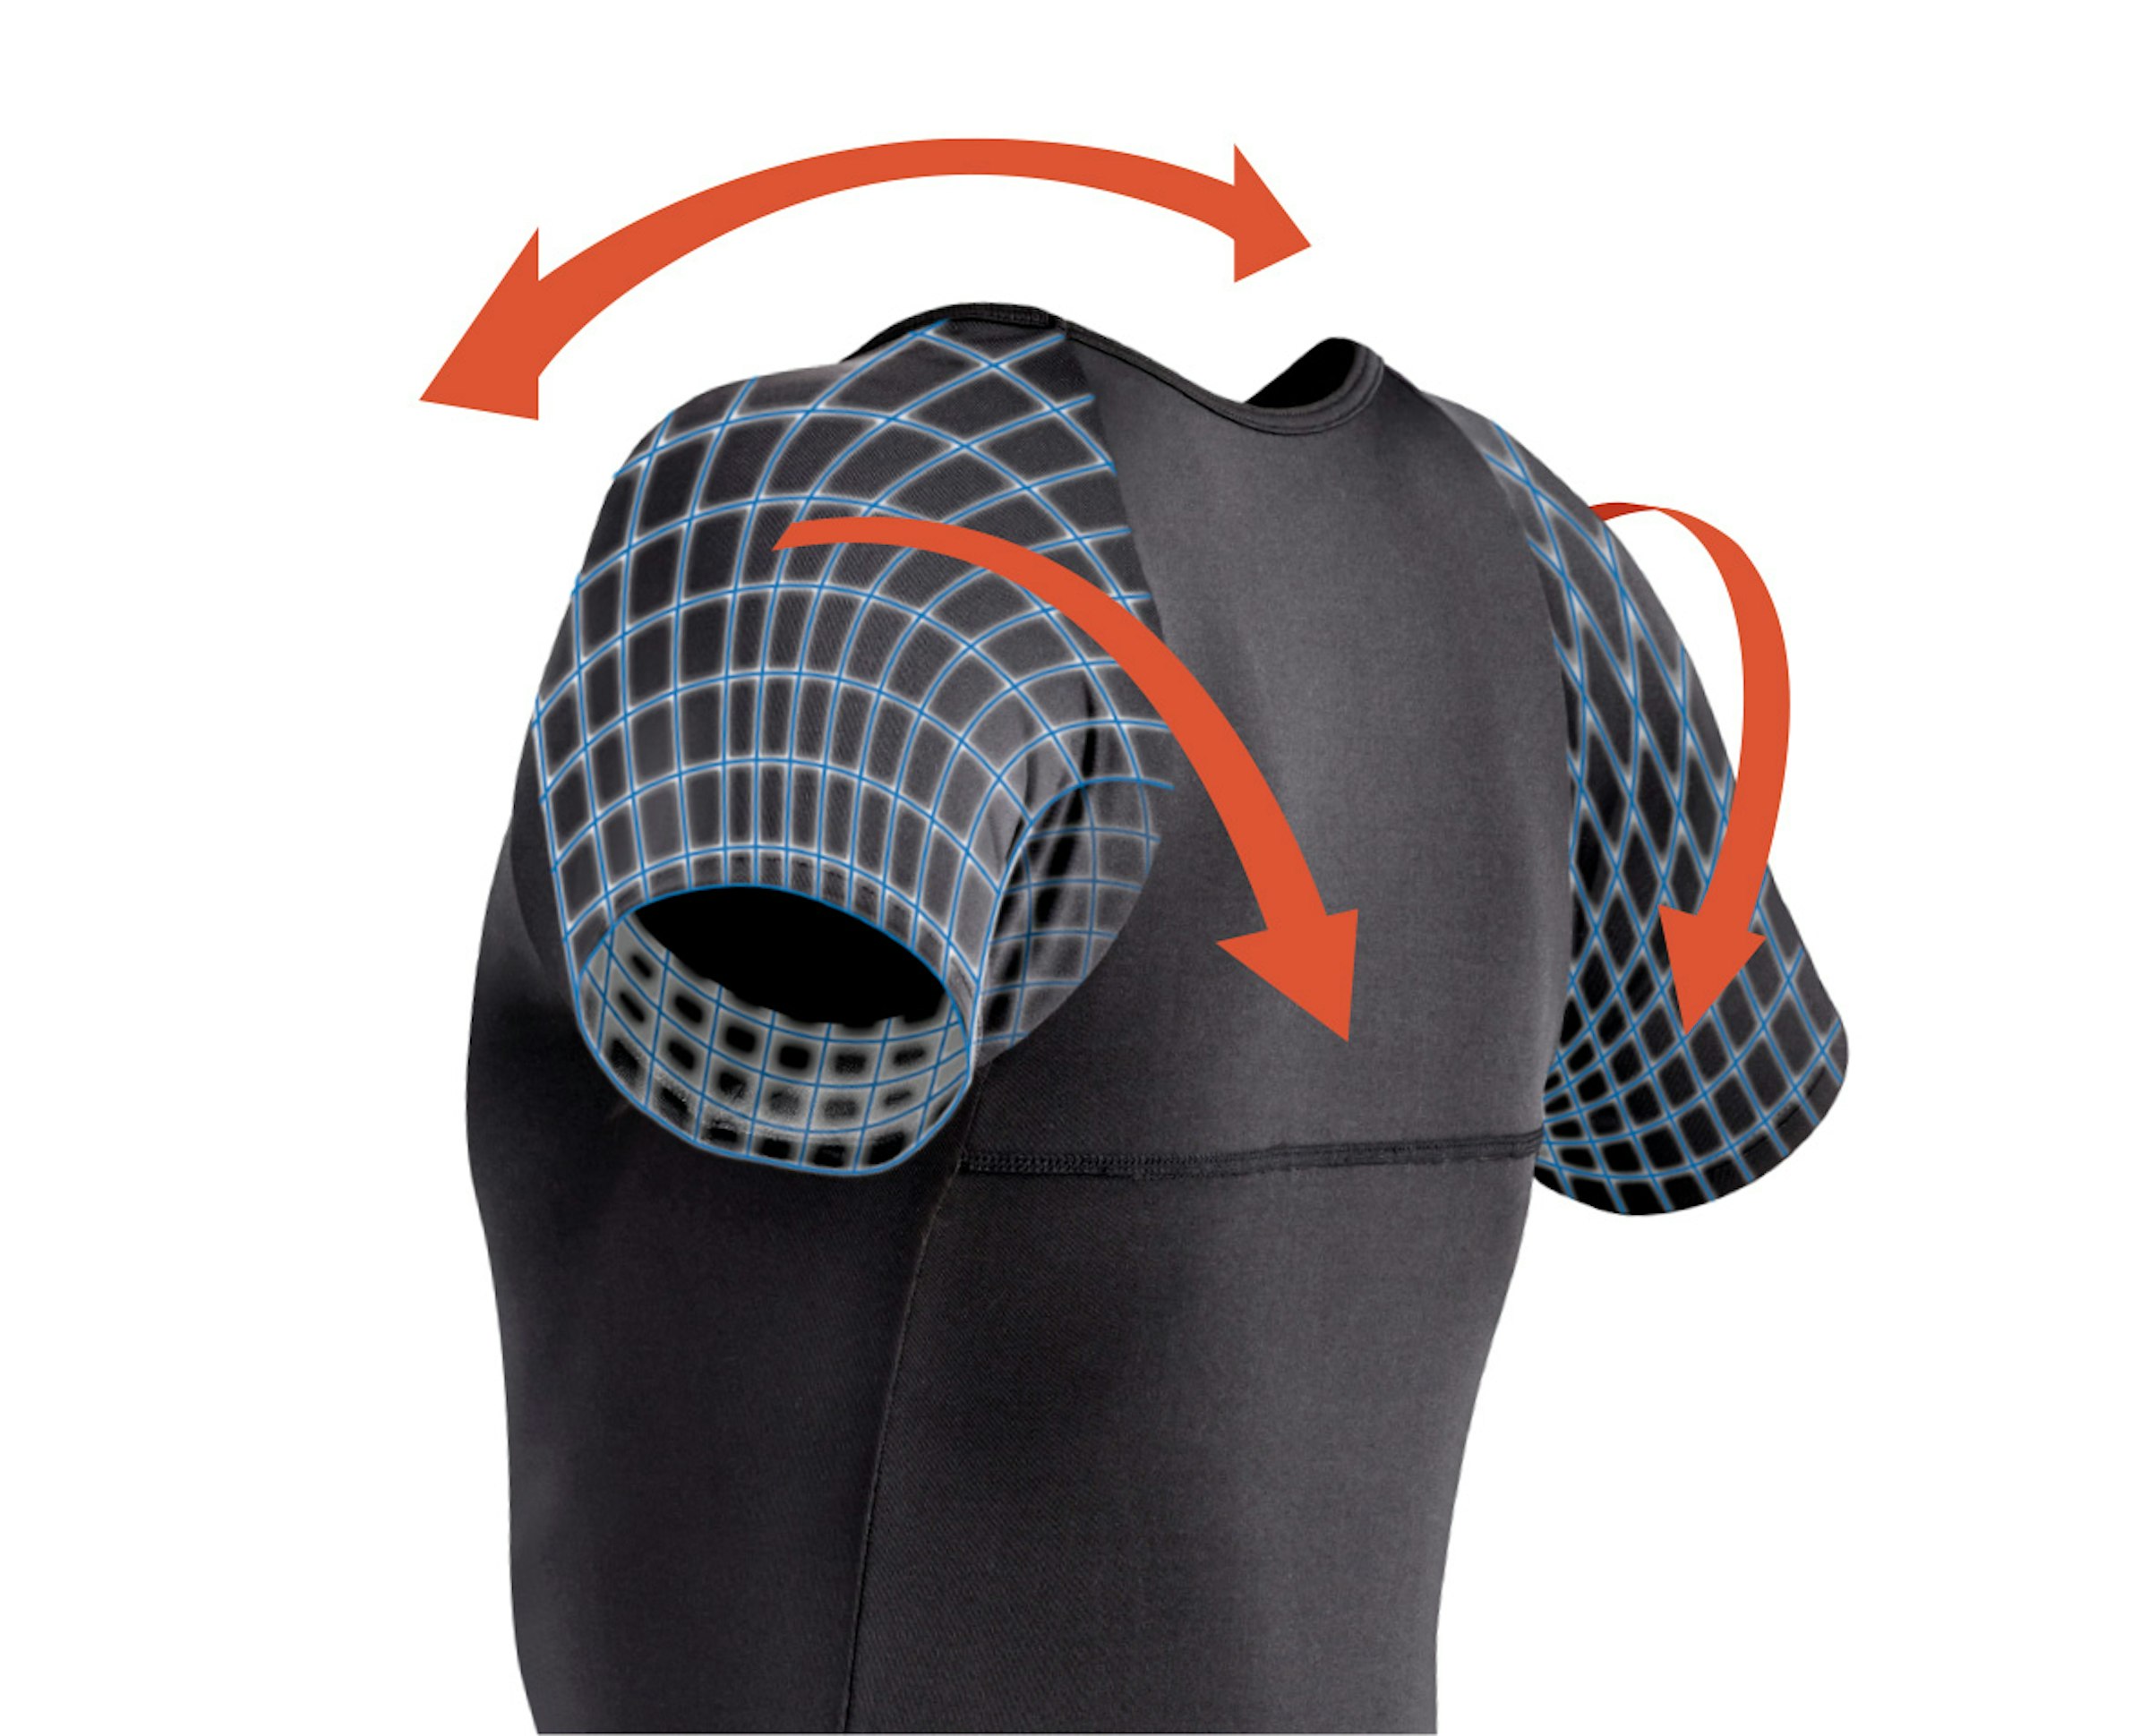 The Open Chest function is achieved by orienting the sleeves backward to naturally open the chest.